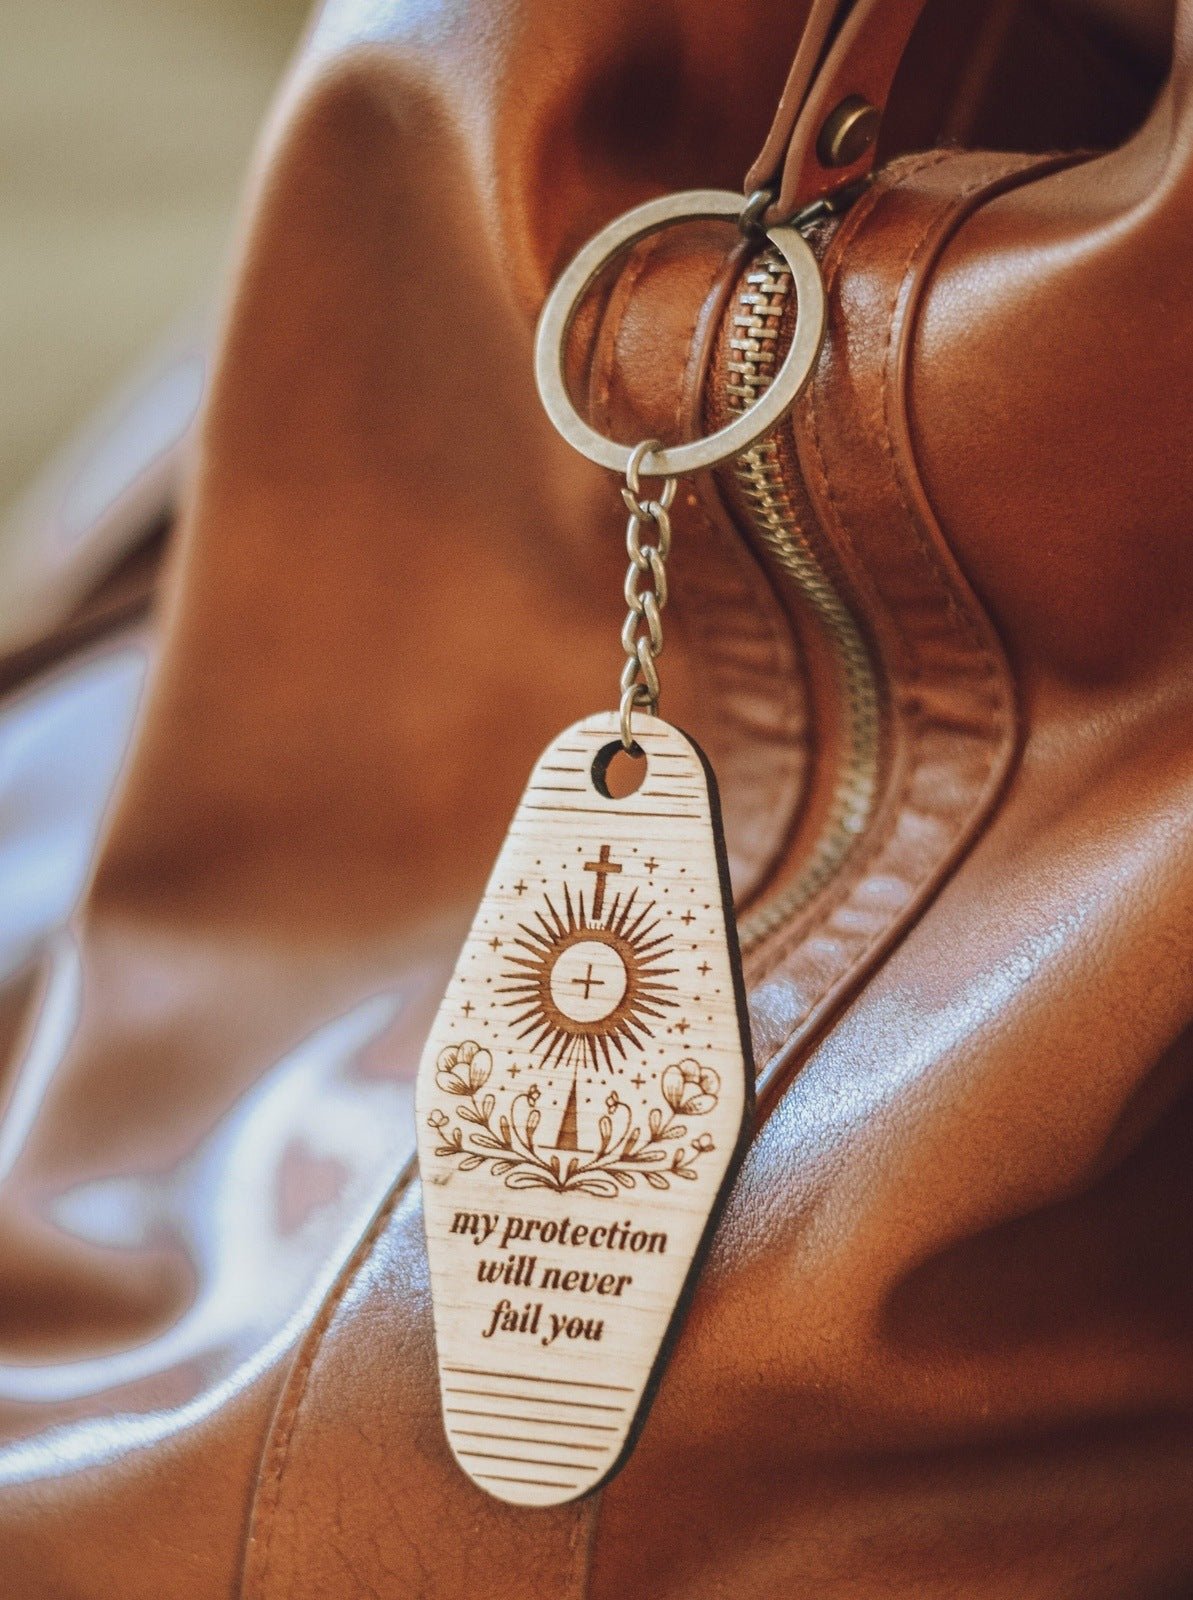 St. Clare of Assisi Catholic Keychain - Little Way Design Co.